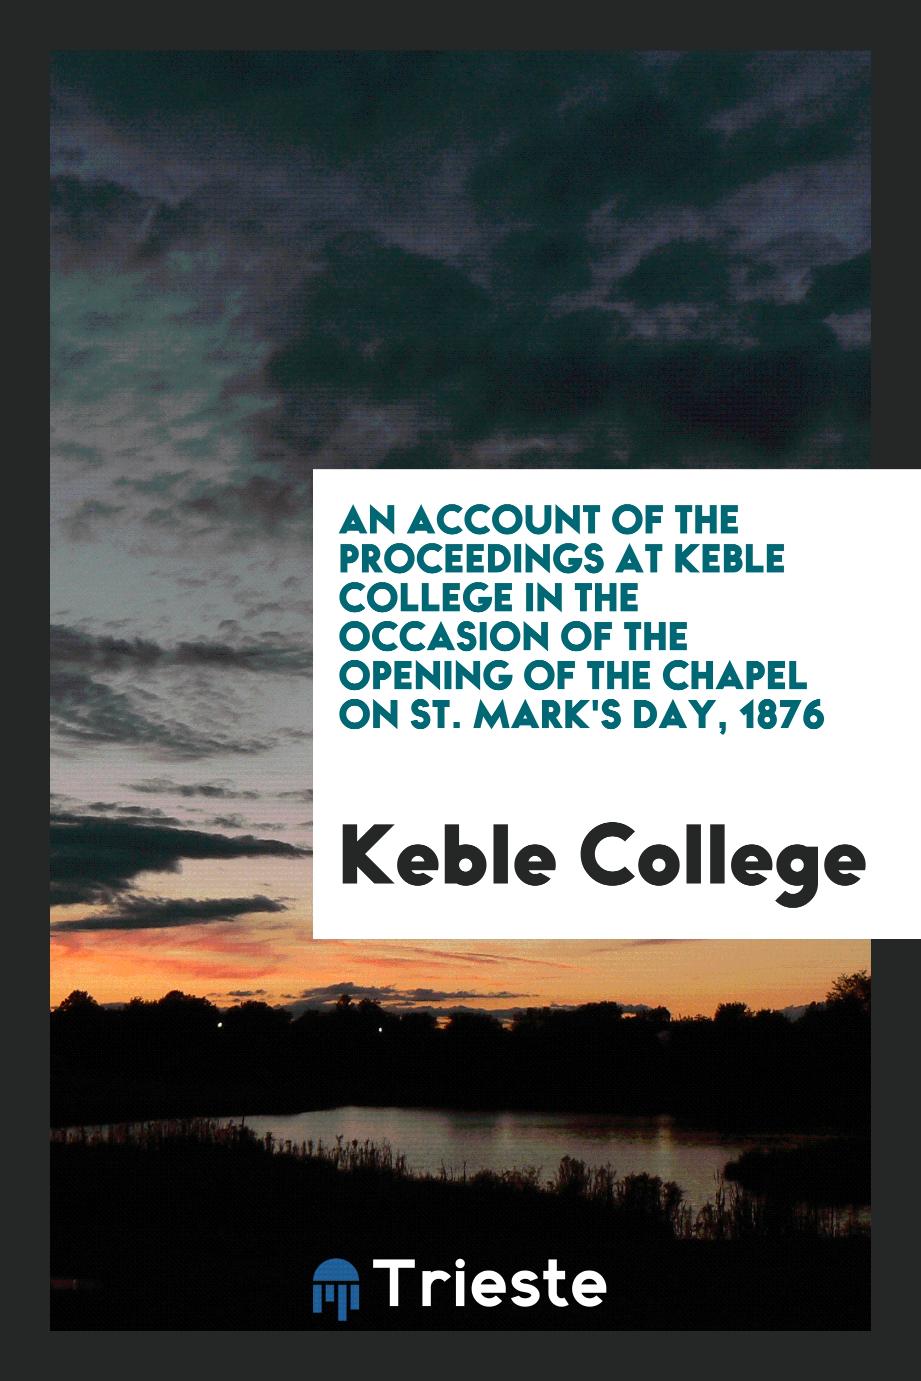 An Account of the Proceedings at Keble College in the Occasion of the Opening of the Chapel on St. Mark's Day, 1876